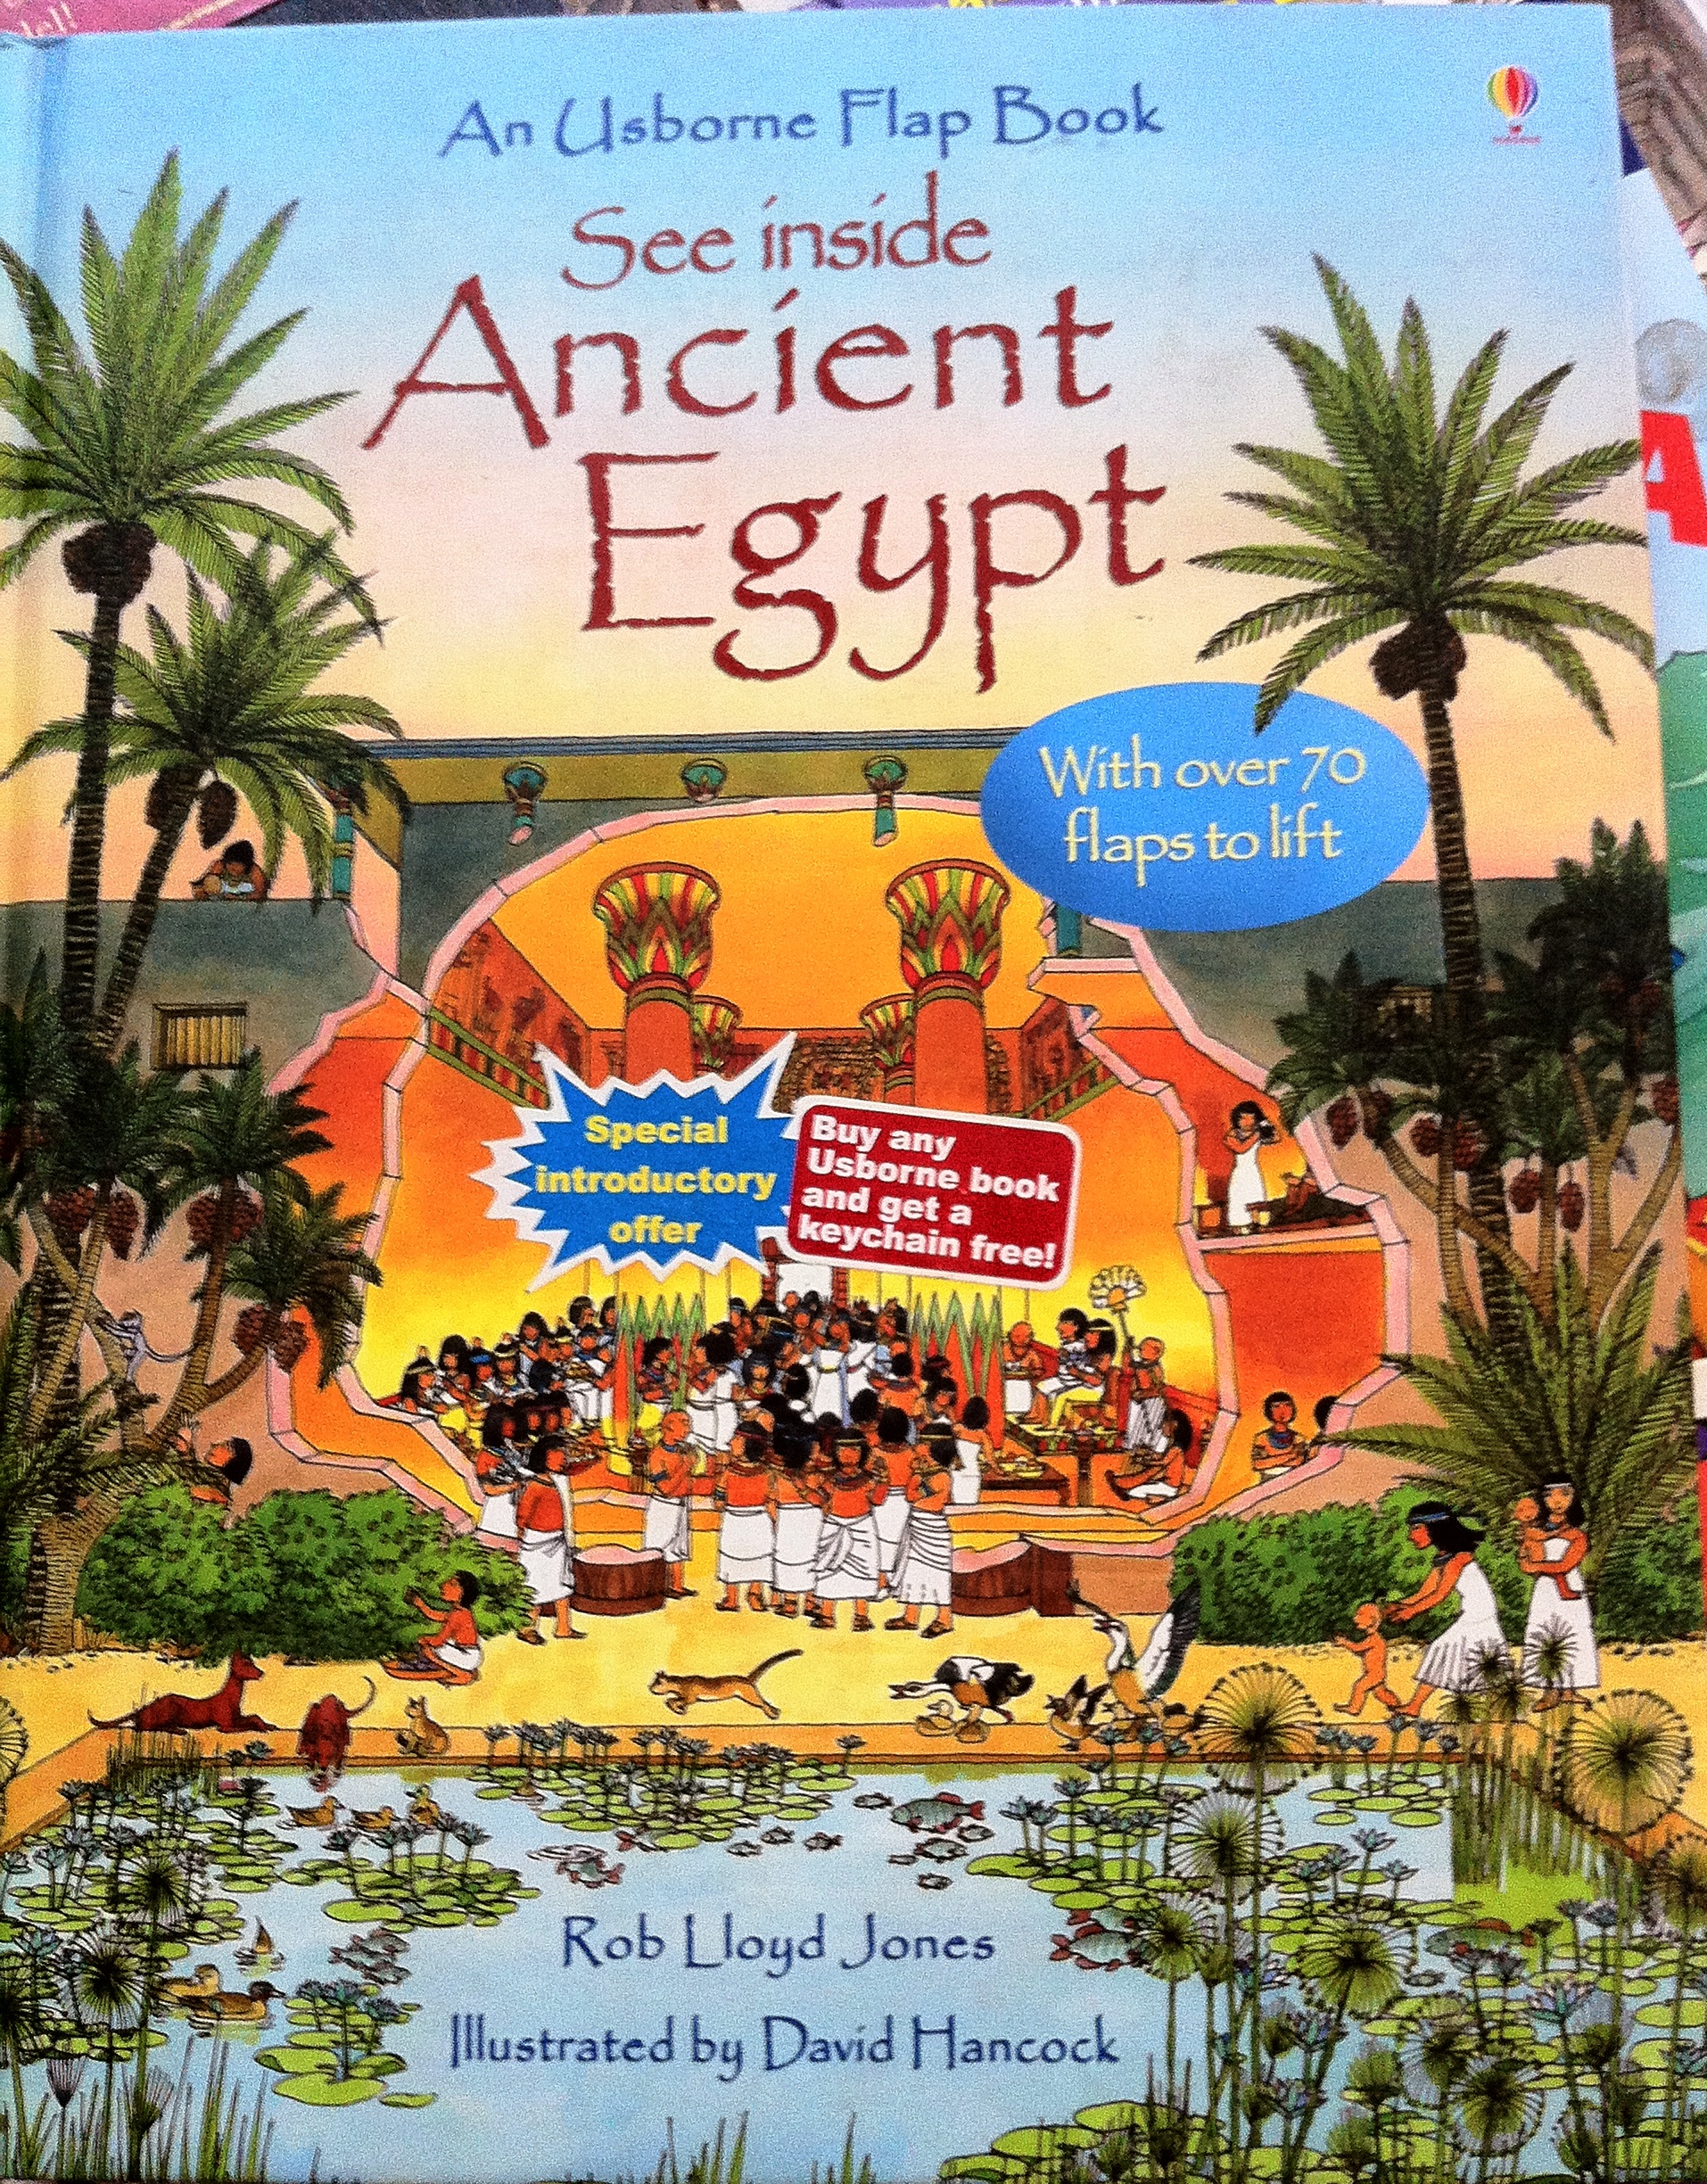 Ancient Egypt is so colorful and bright